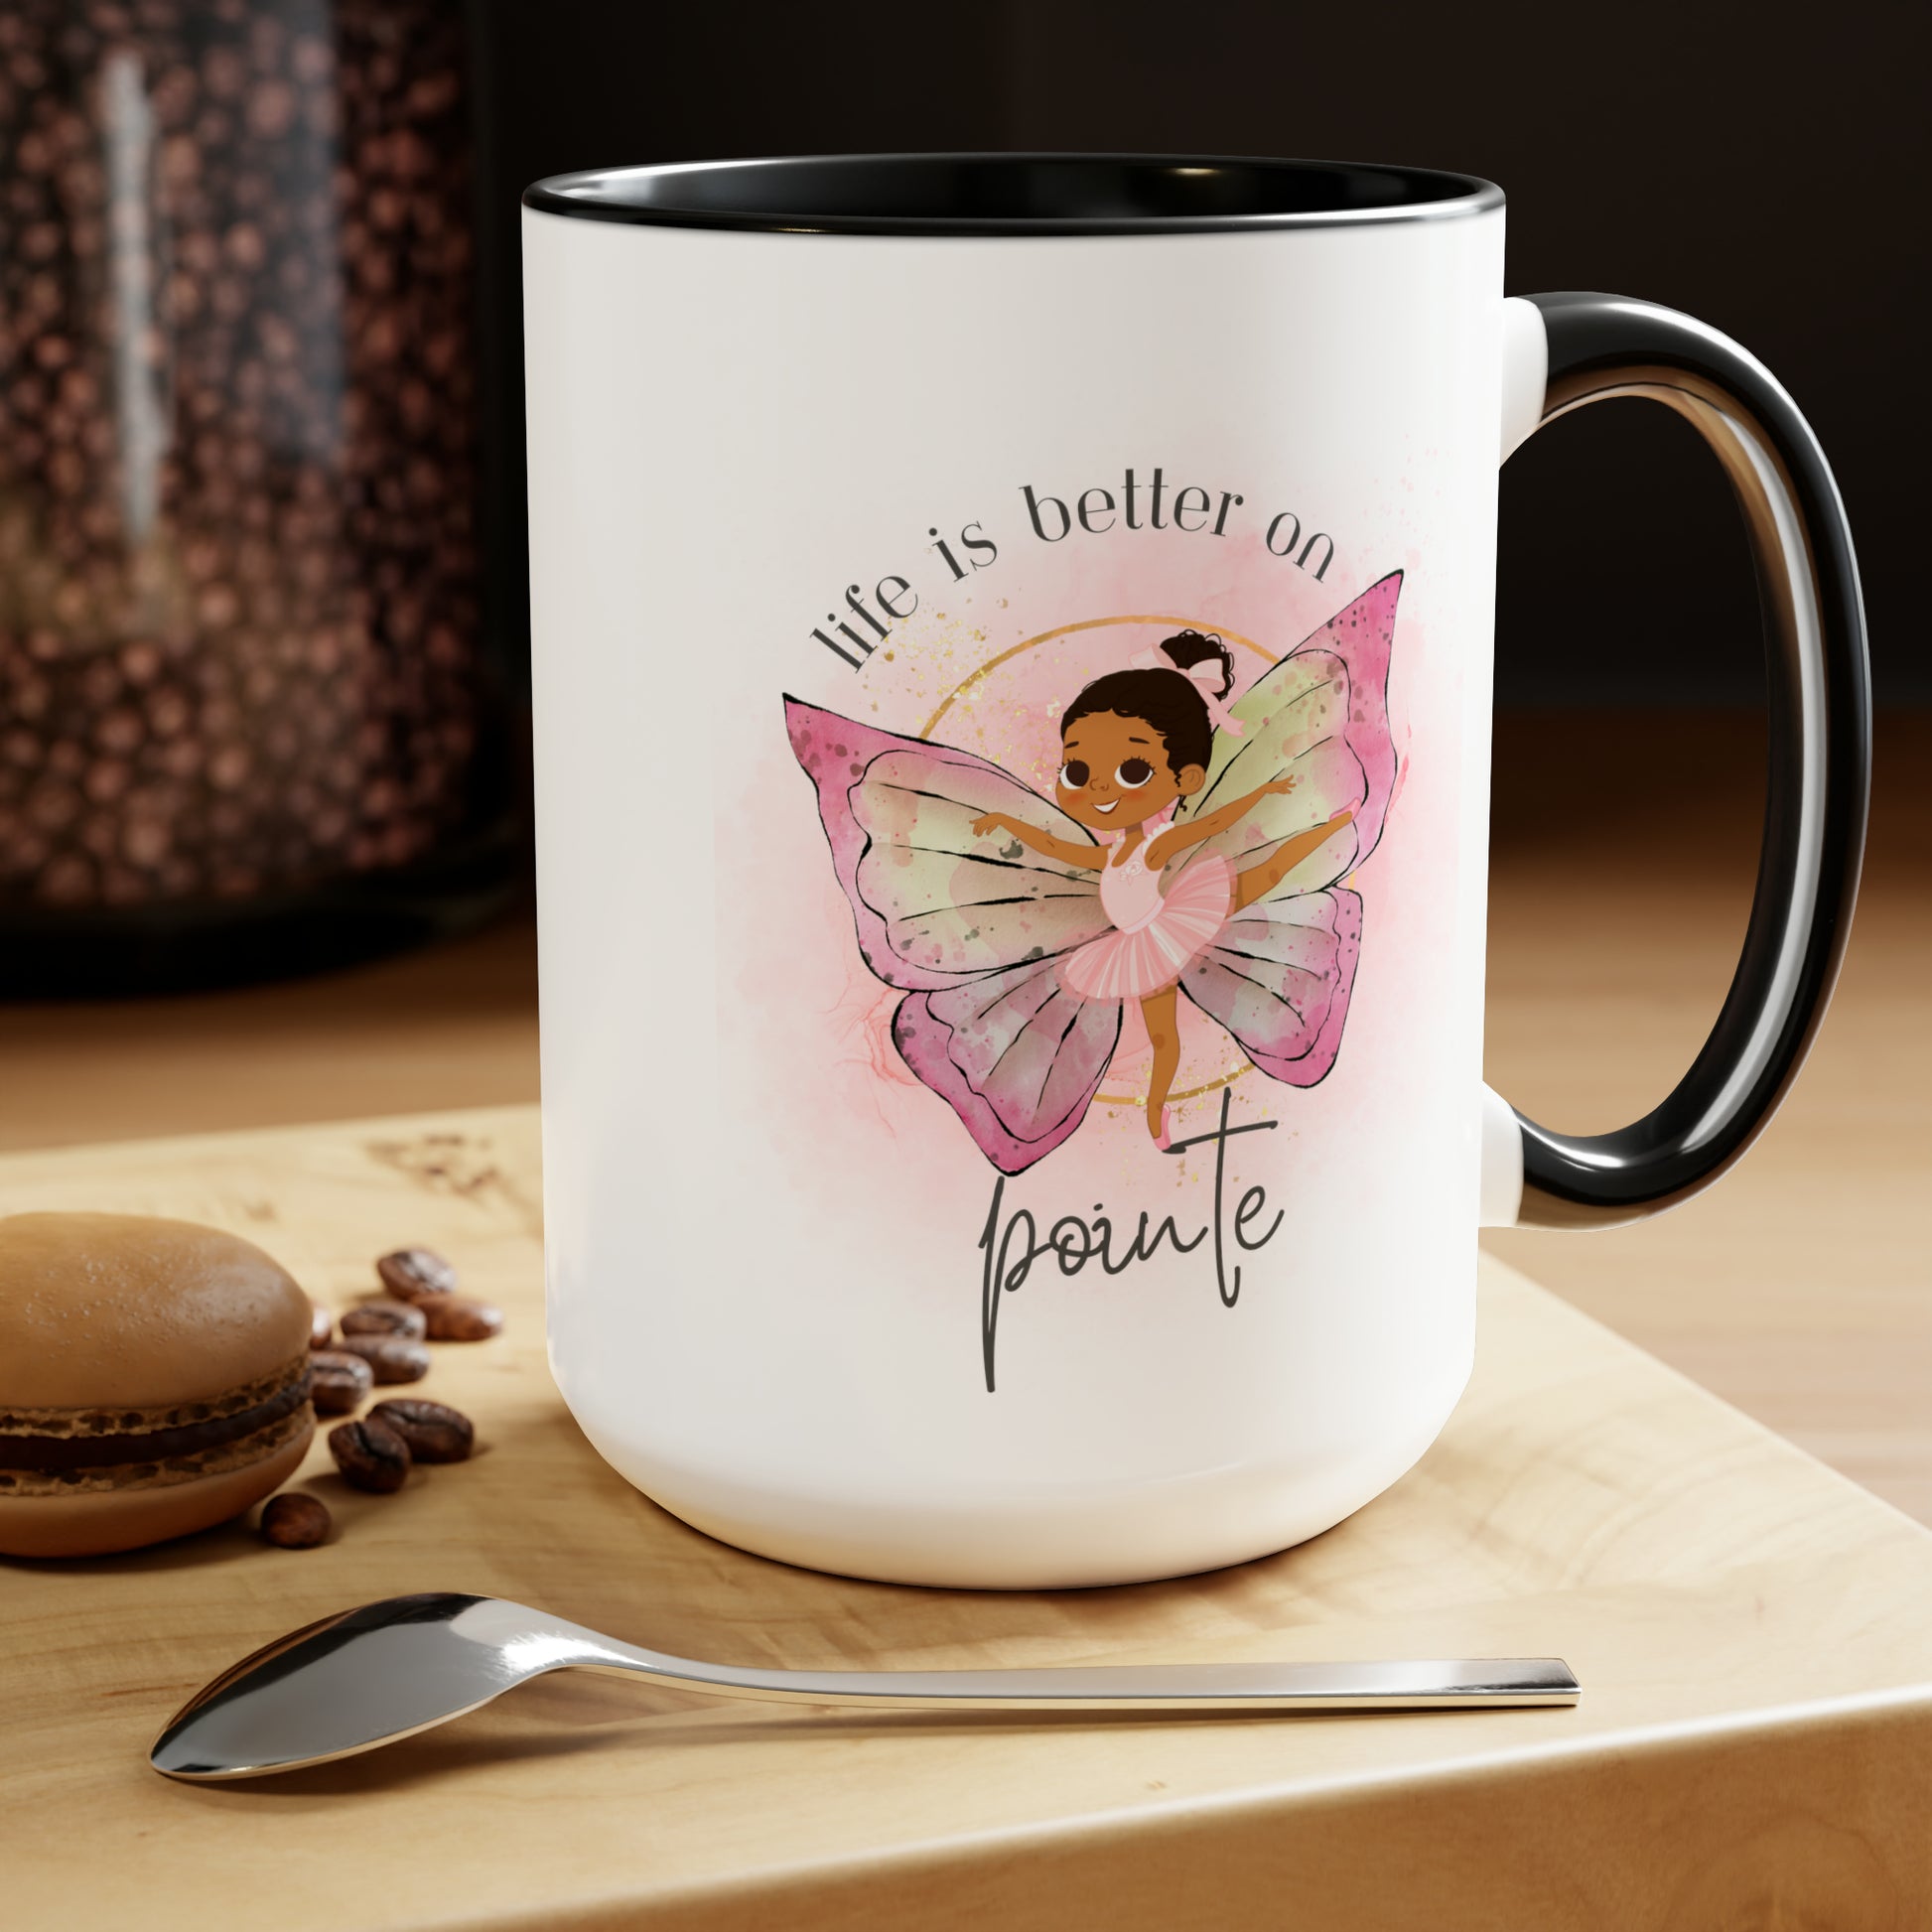 Two-Tone Coffee Mugs, 15oz - Young Ballerina - Life is better on pointe - black rim